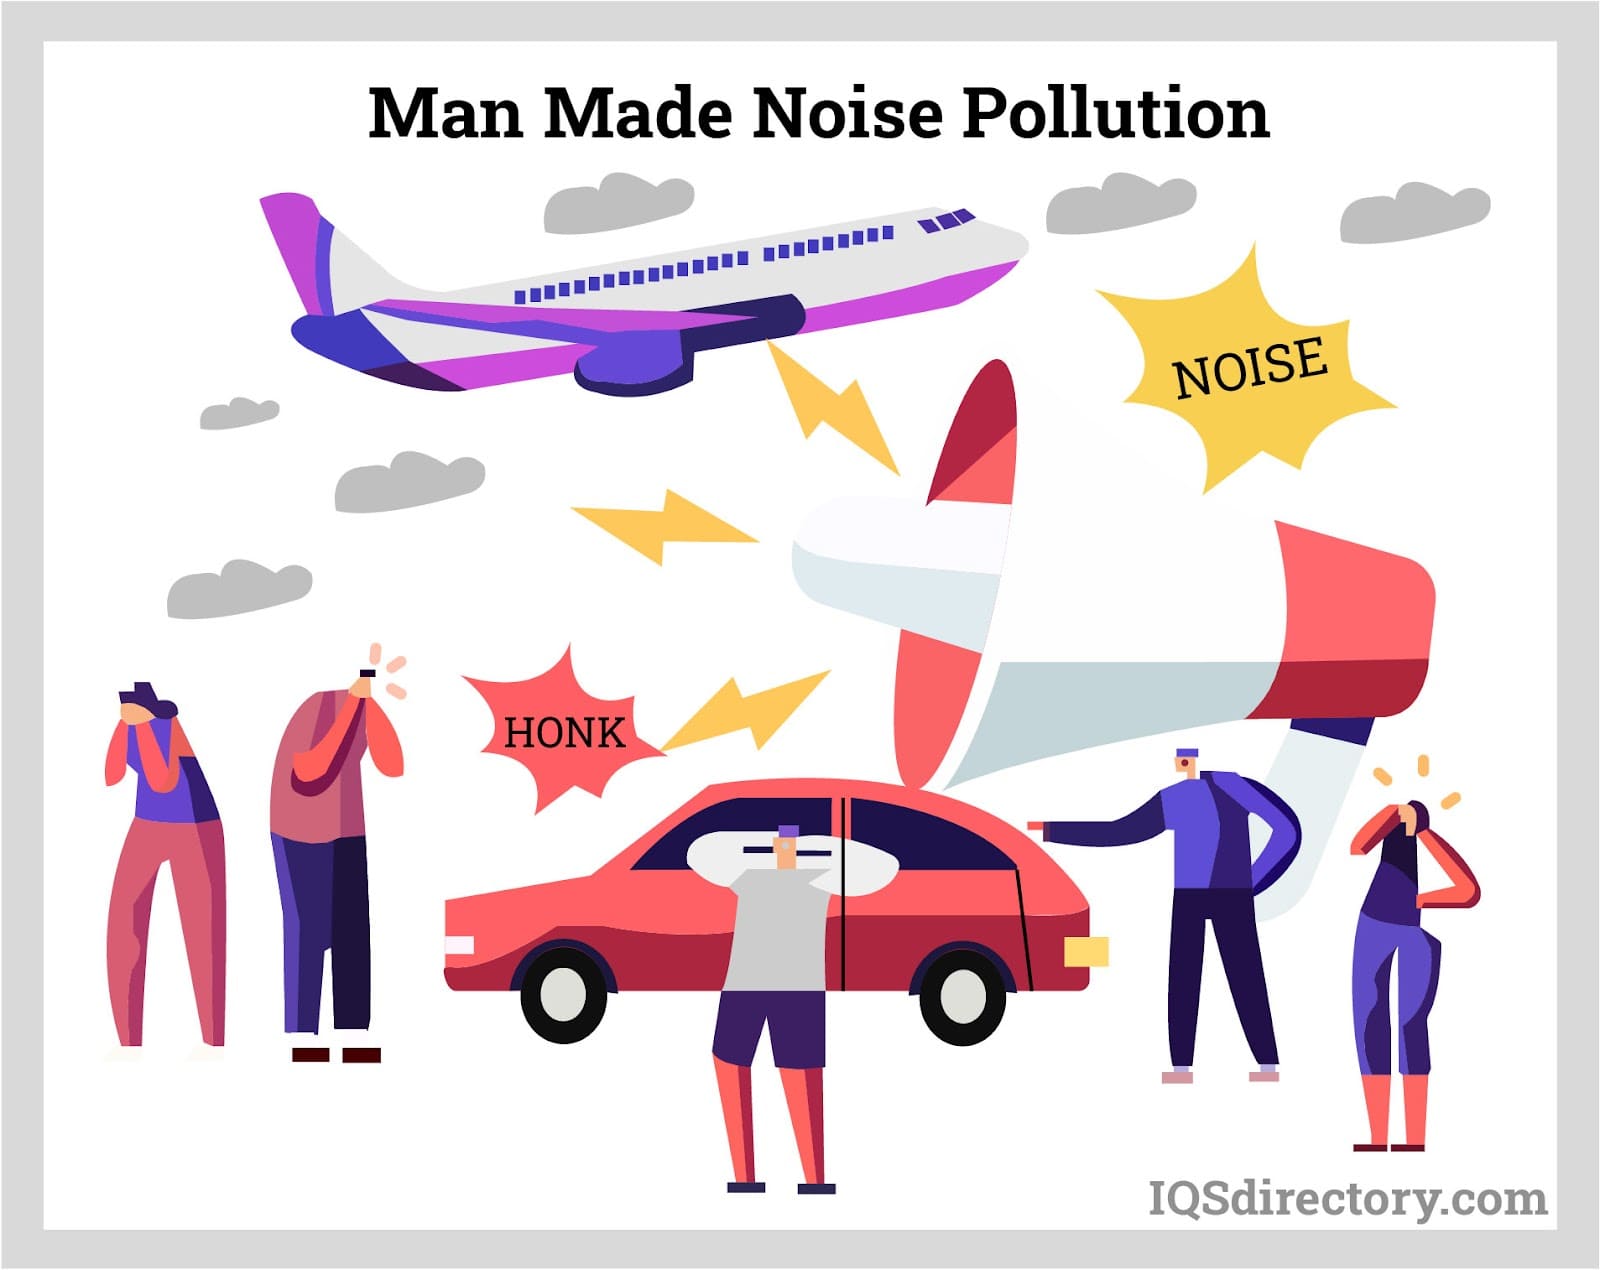  Man Made Noise Pollution